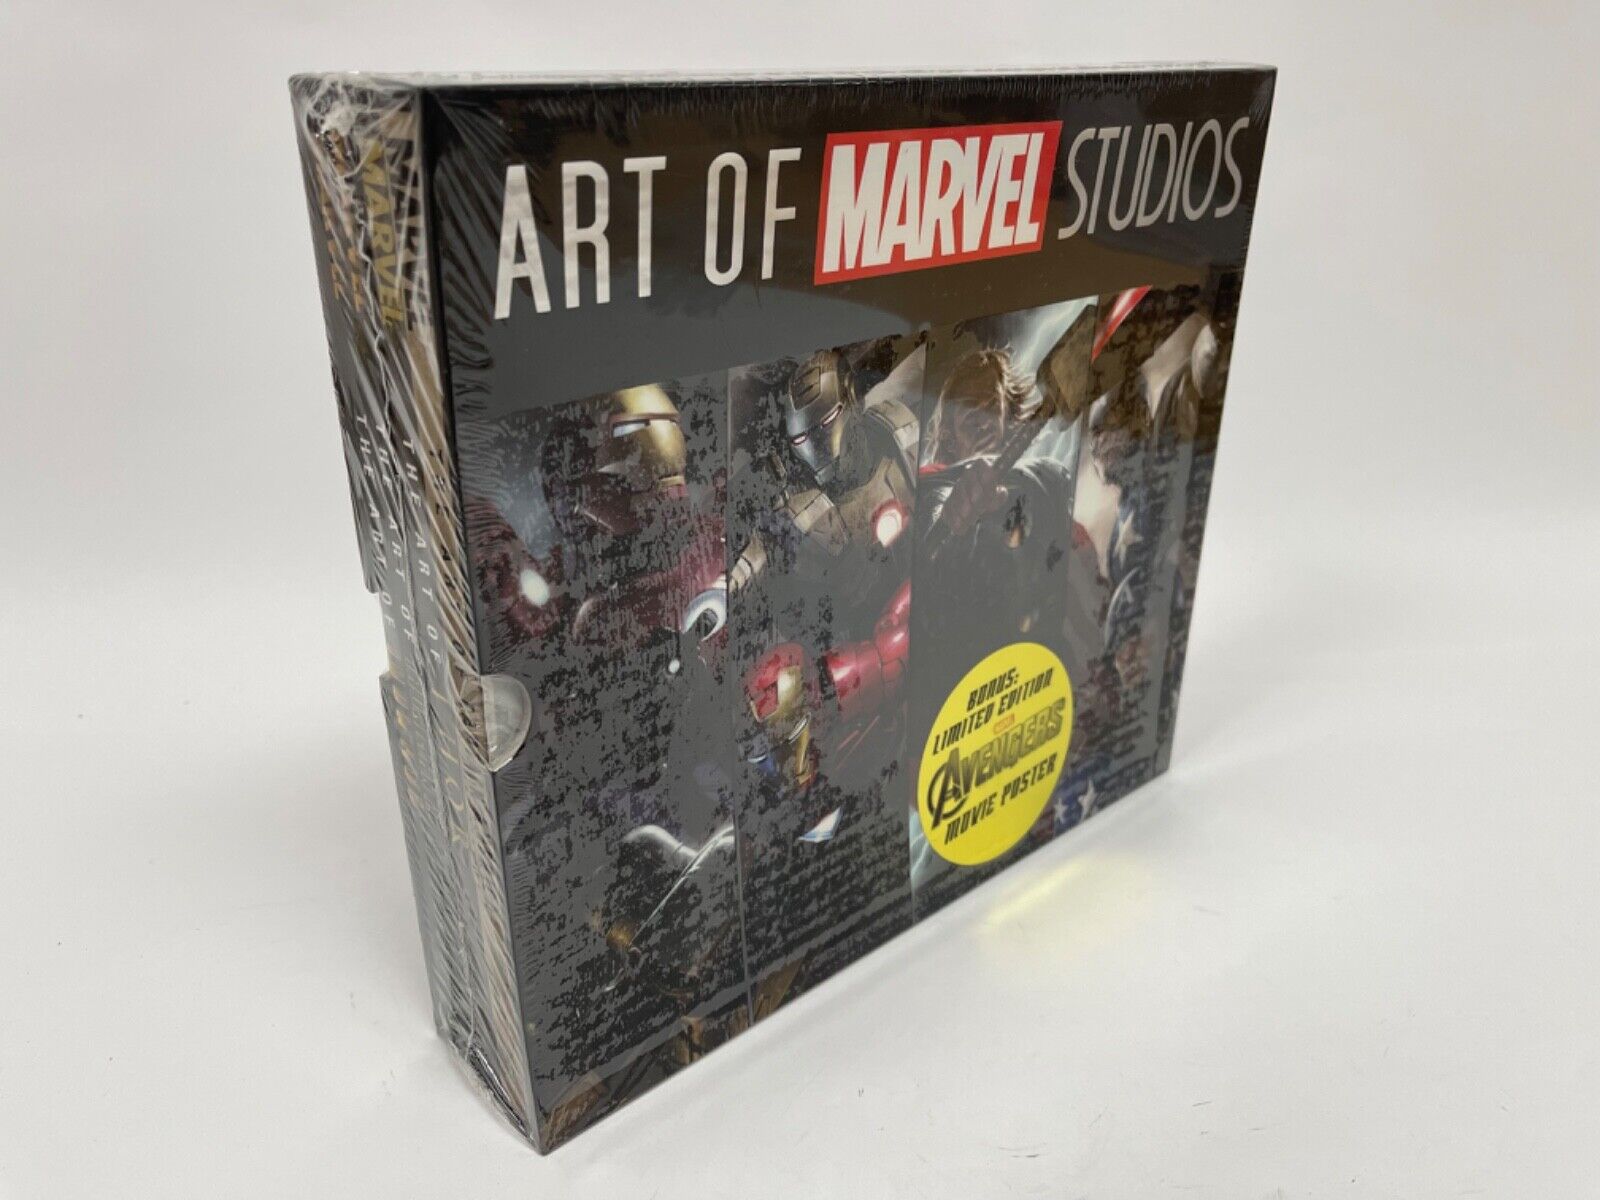 Art of Marvel Studios 4 Book Set - Iron Man Thor Captain America Case and Poster